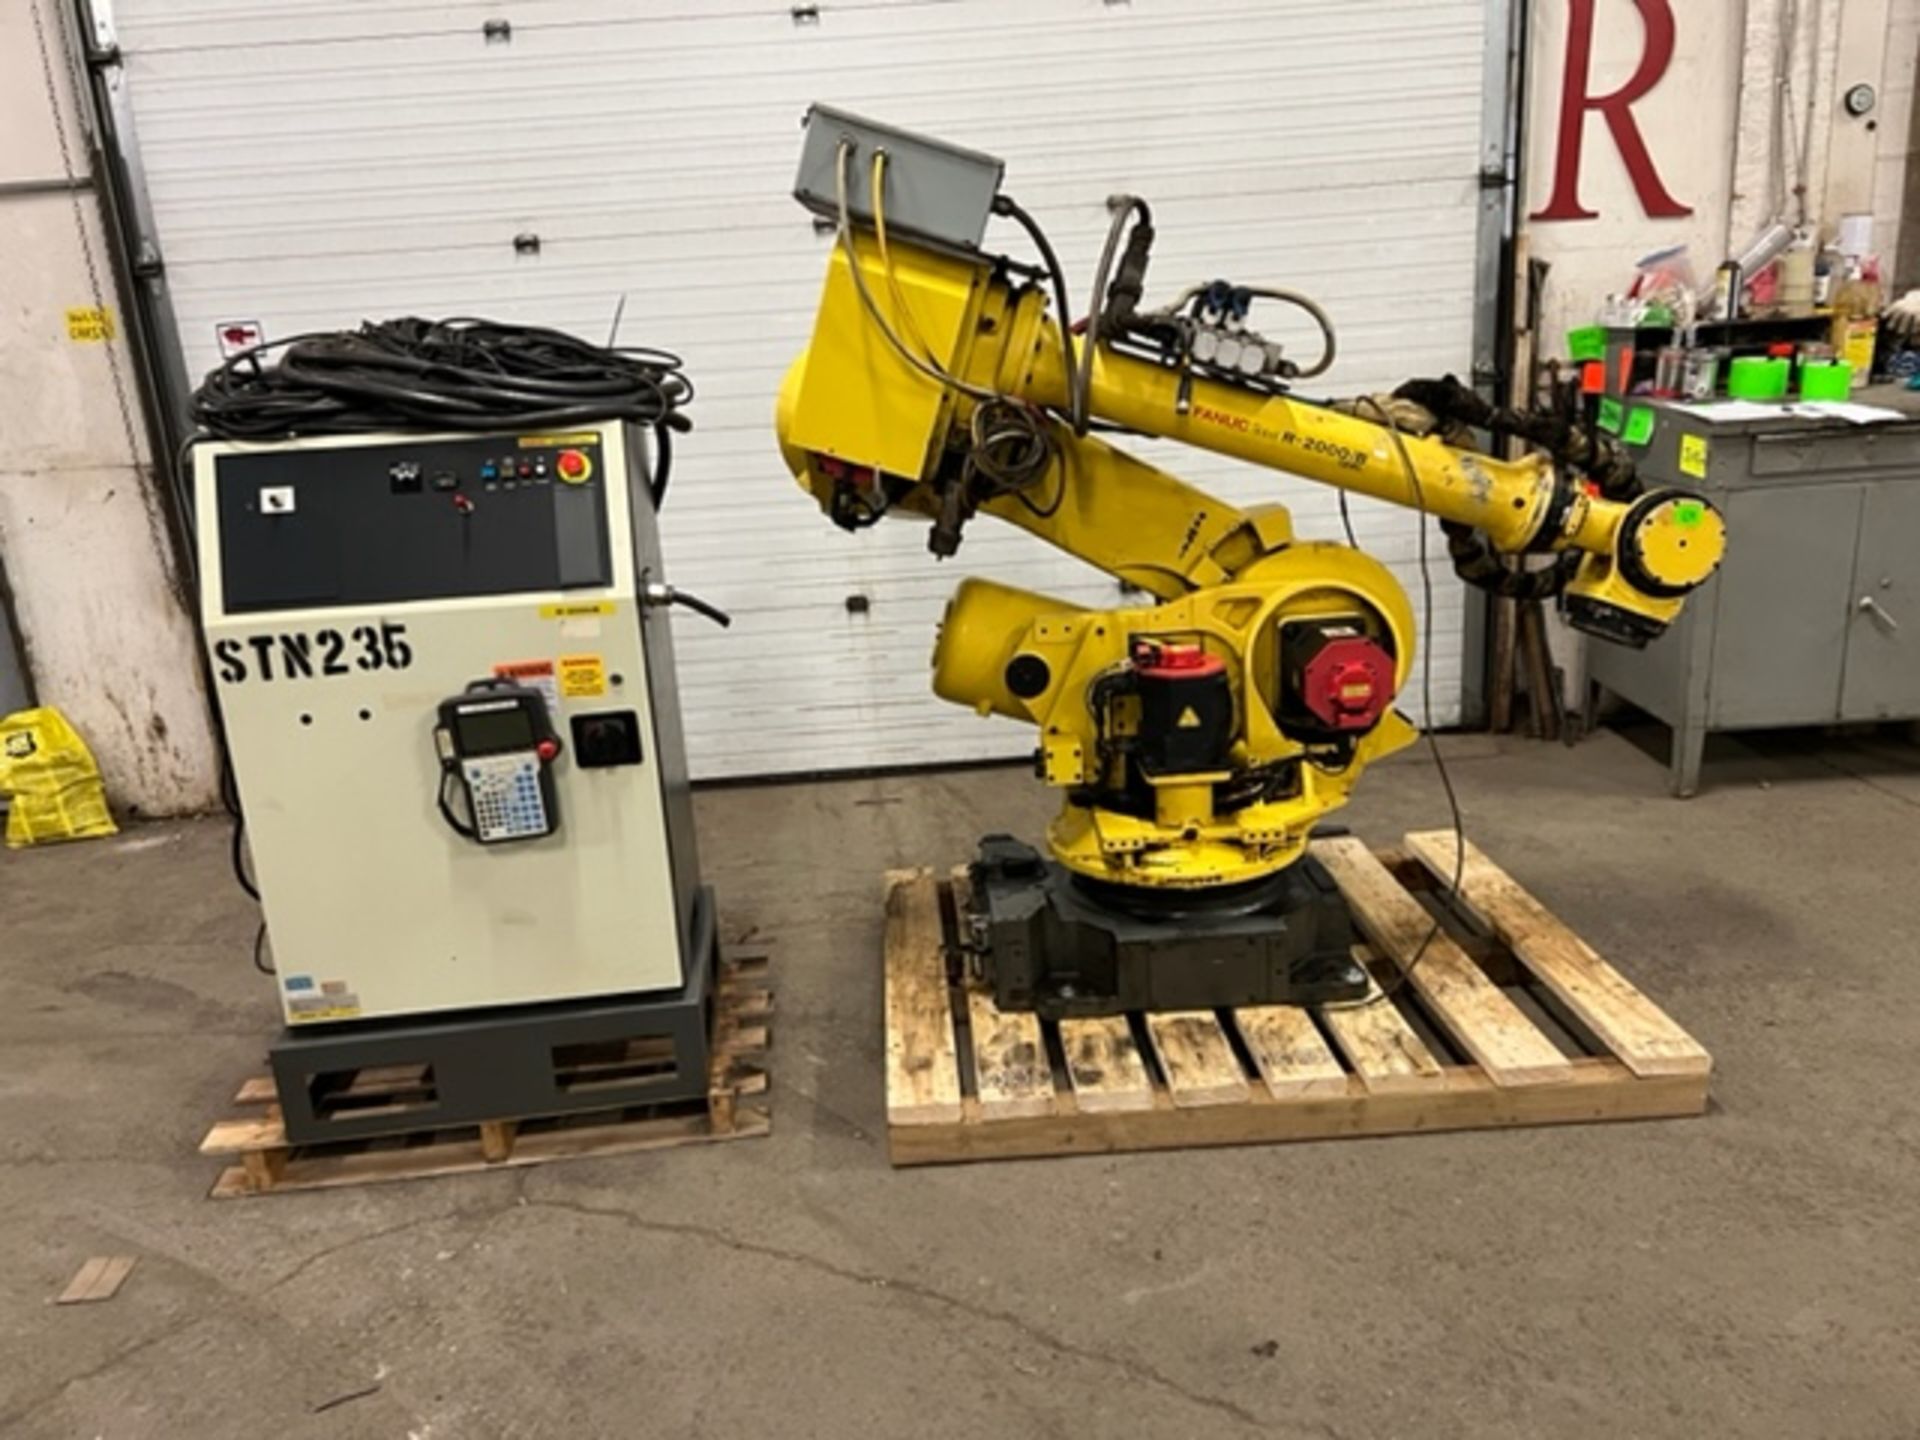 MINT 2008 Fanuc Handling Robot Model R-2000iB 125L - 125kg payload with R-30iA Controller and